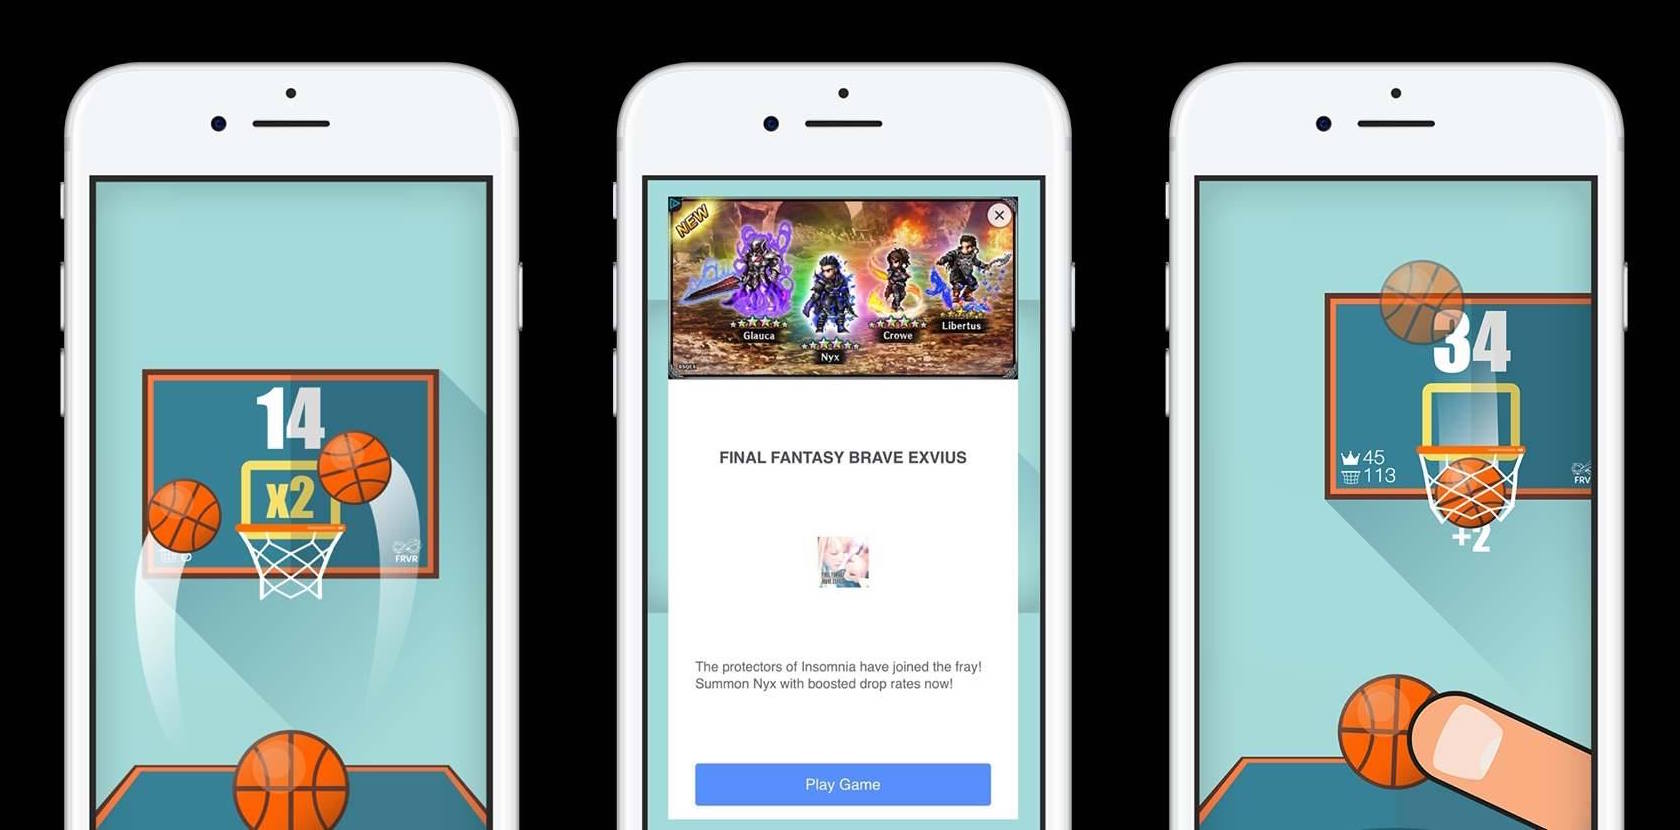 Facebook Messenger lets games monetize with purchases and ads